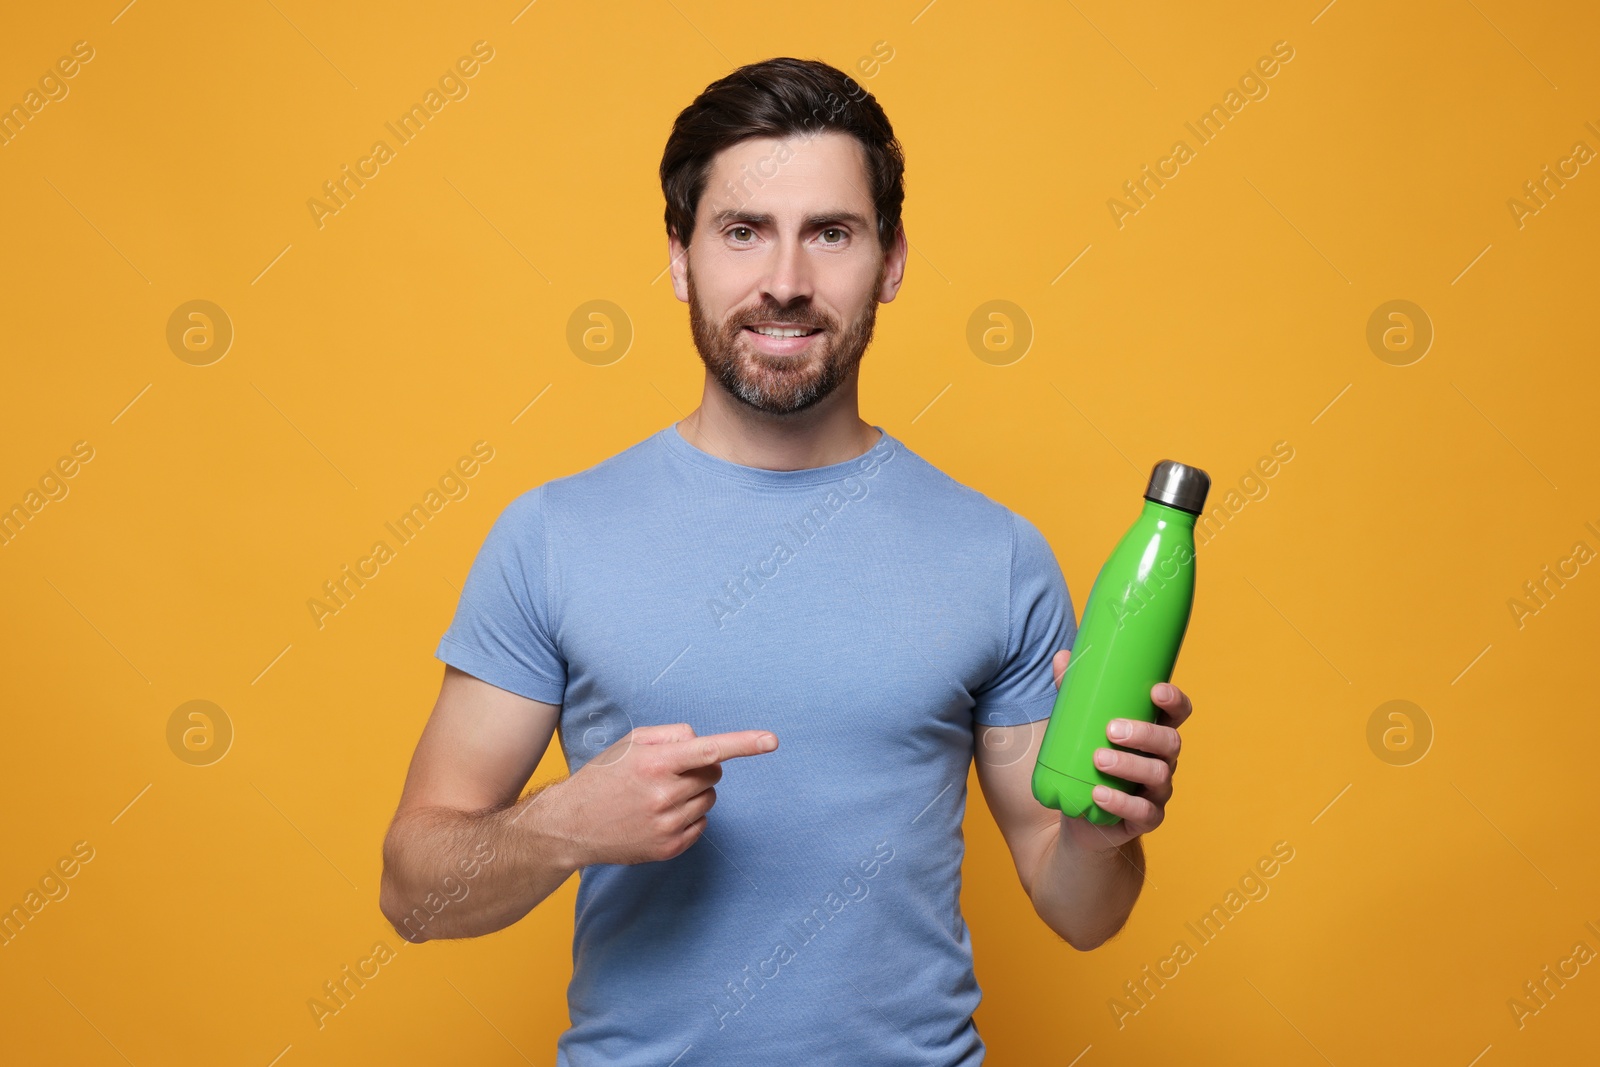 Photo of Man pointing at green thermo bottle on orange background